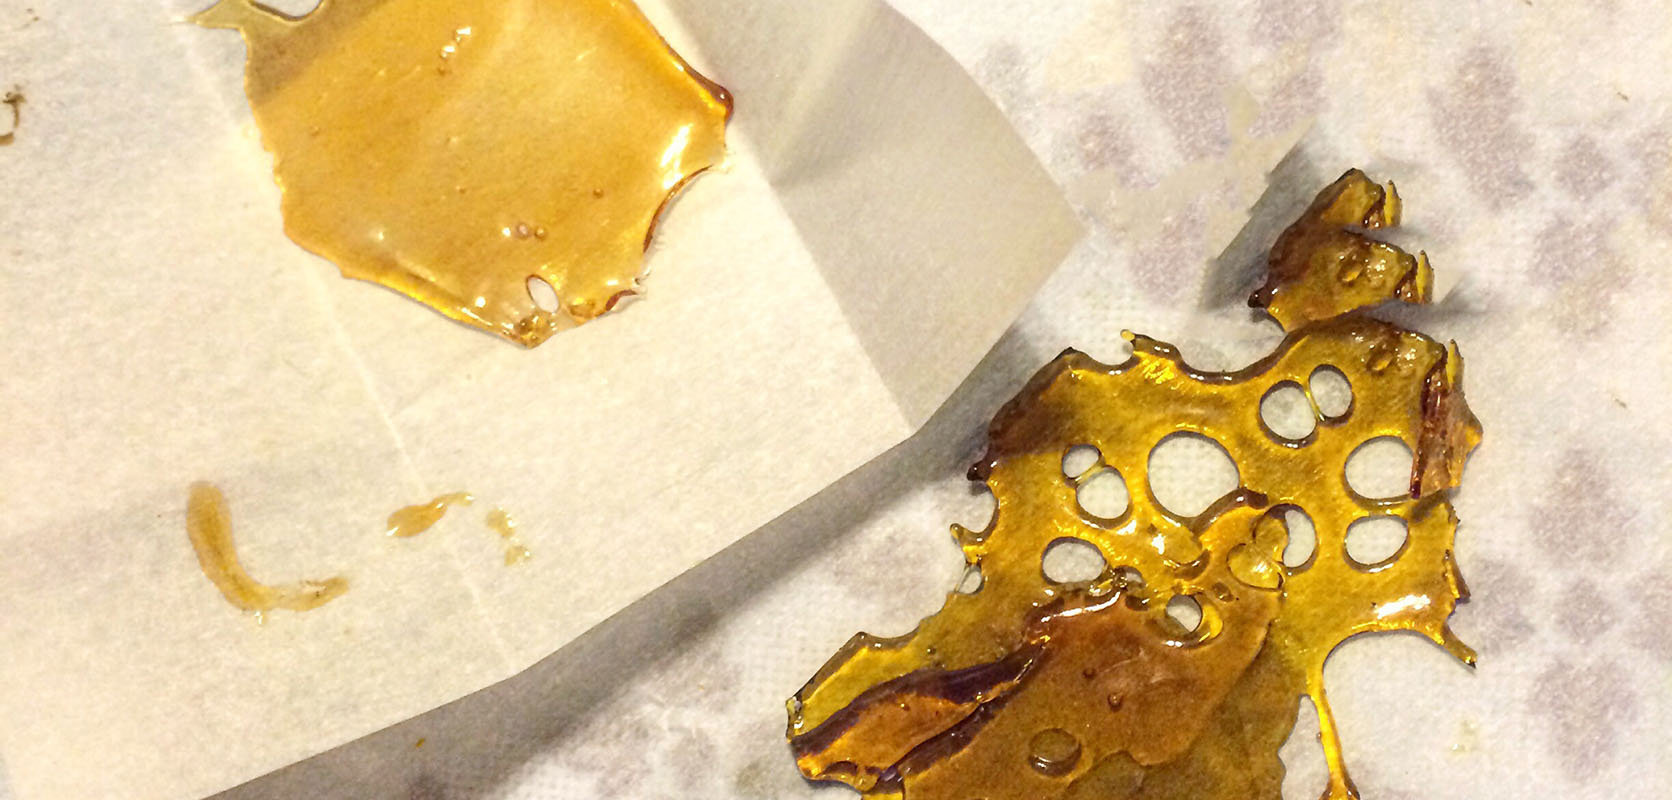 High quality cannabis concentrate shatter from the best online weed dispensary in Canada. dark shatter vs light shatter. buy my bud cannabis online canada. 